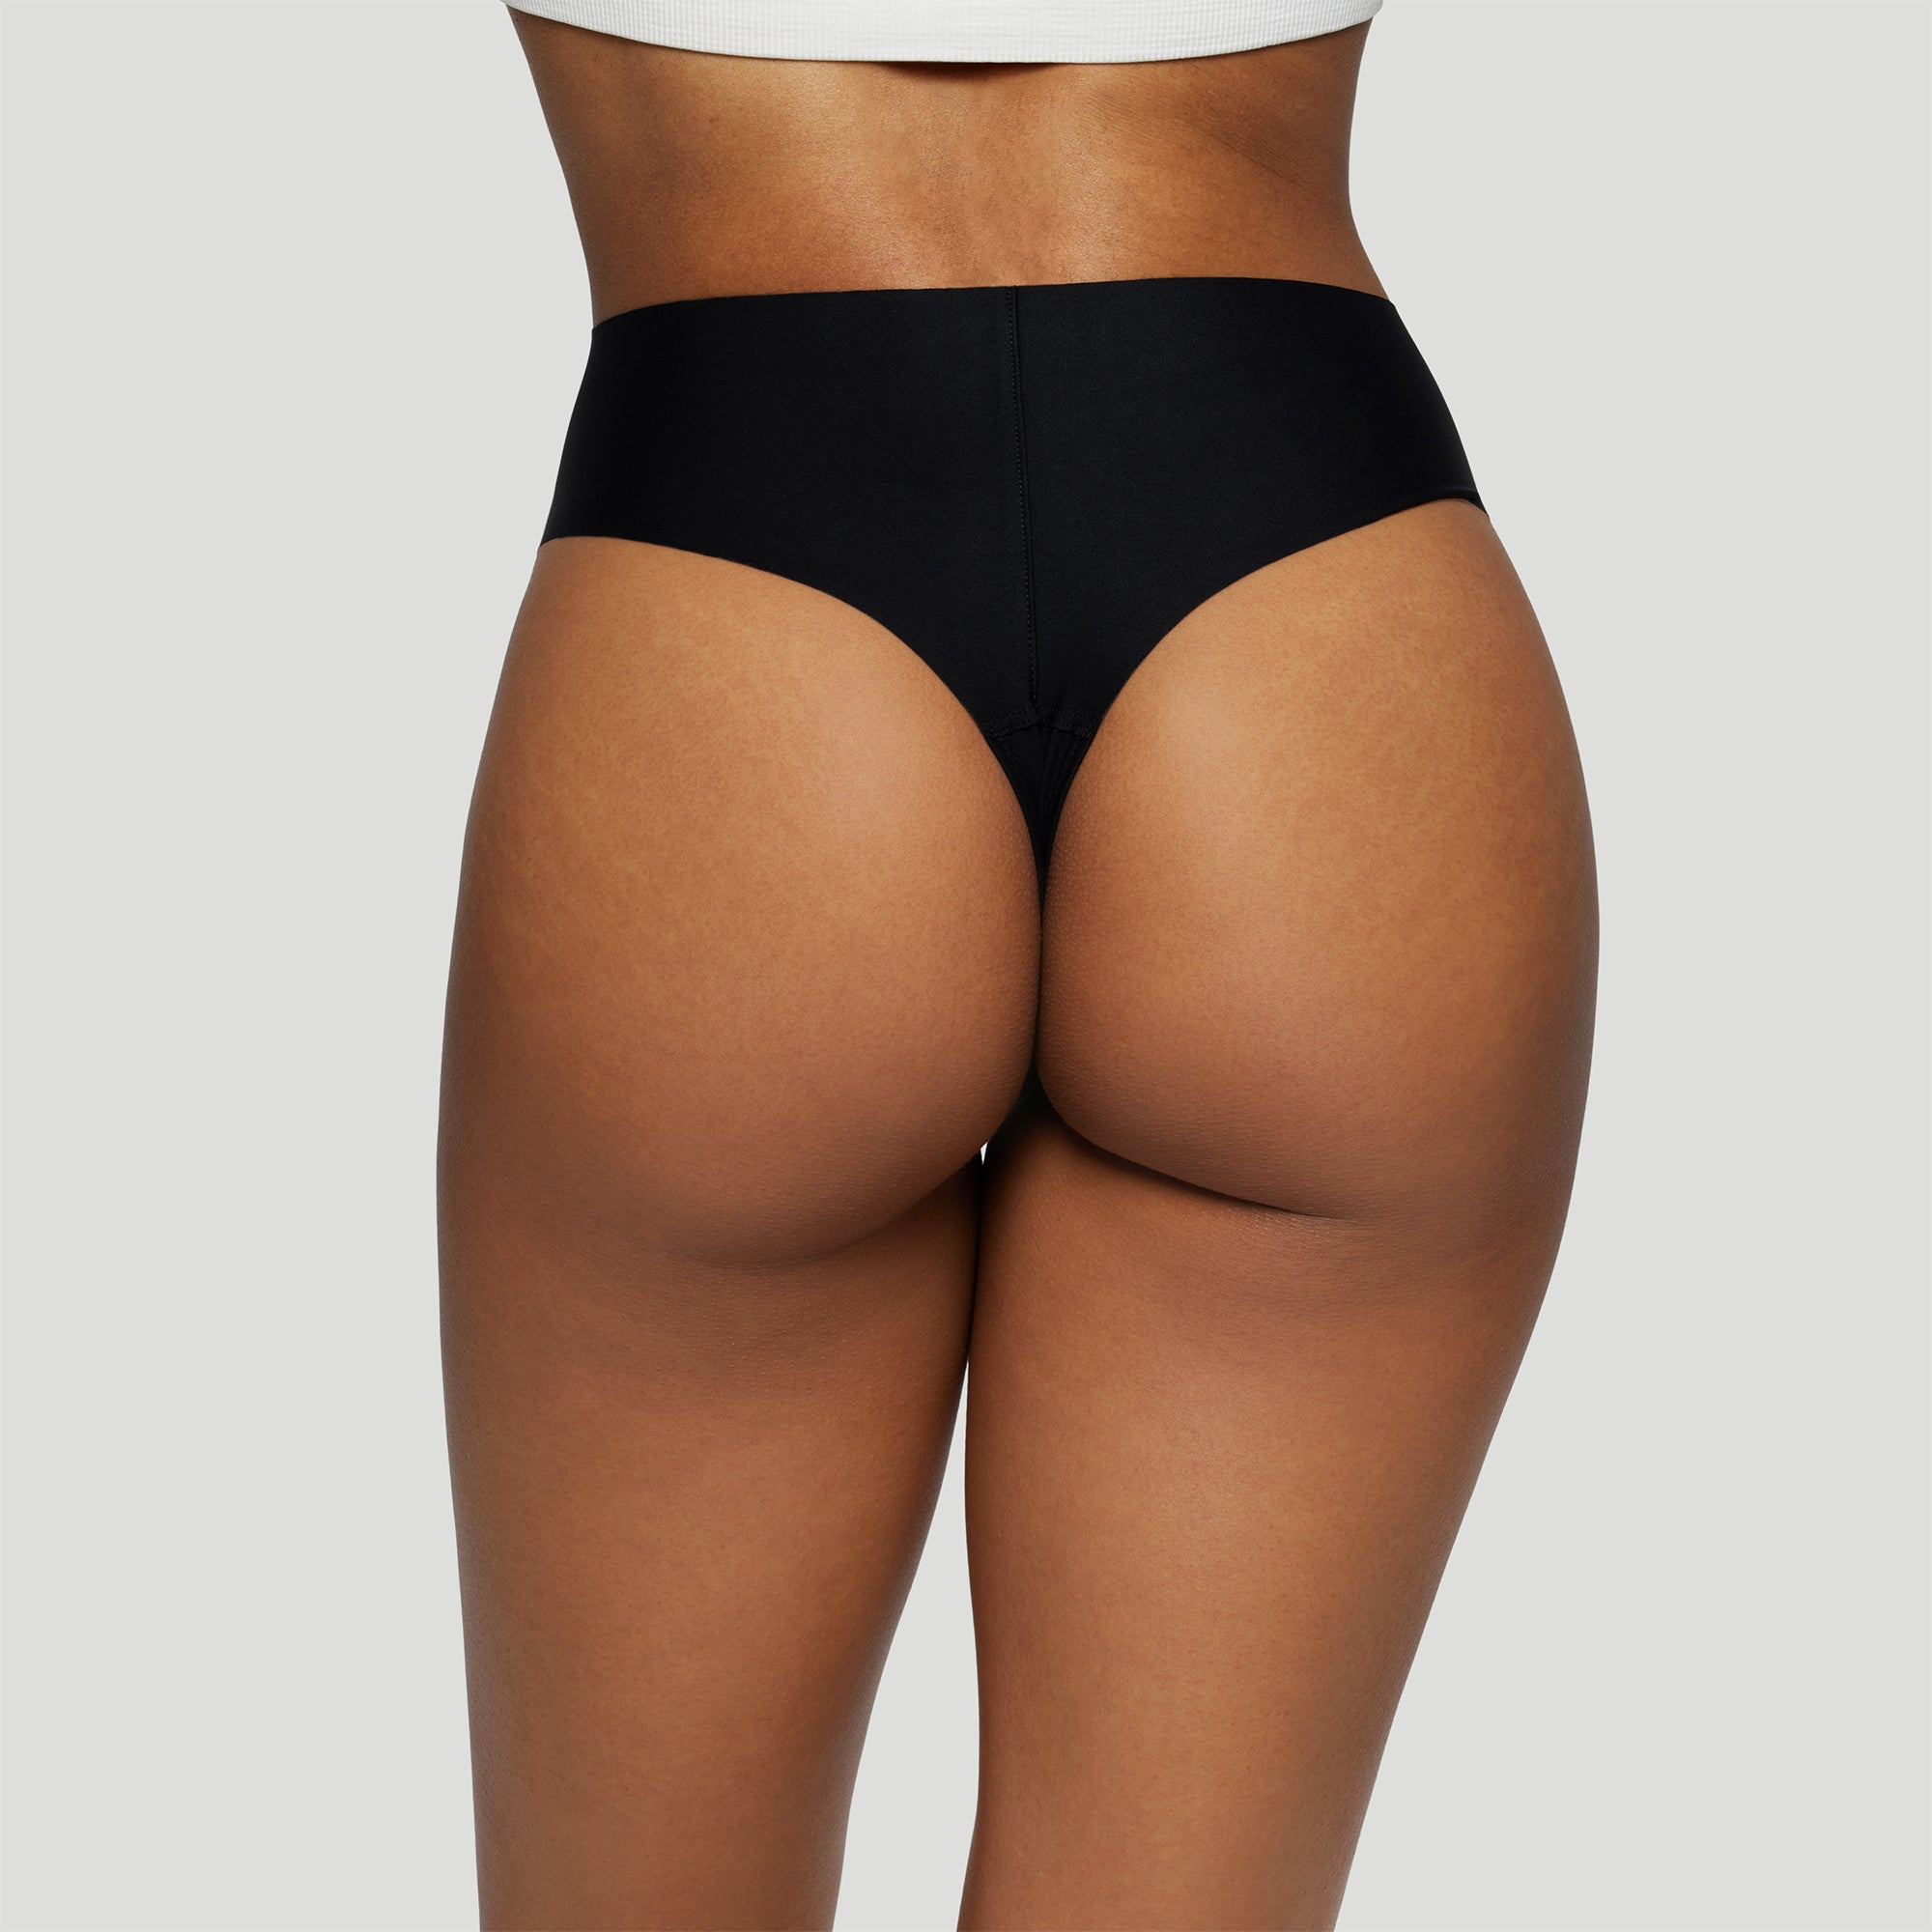 Buy High Waisted Thong Online In India -  India